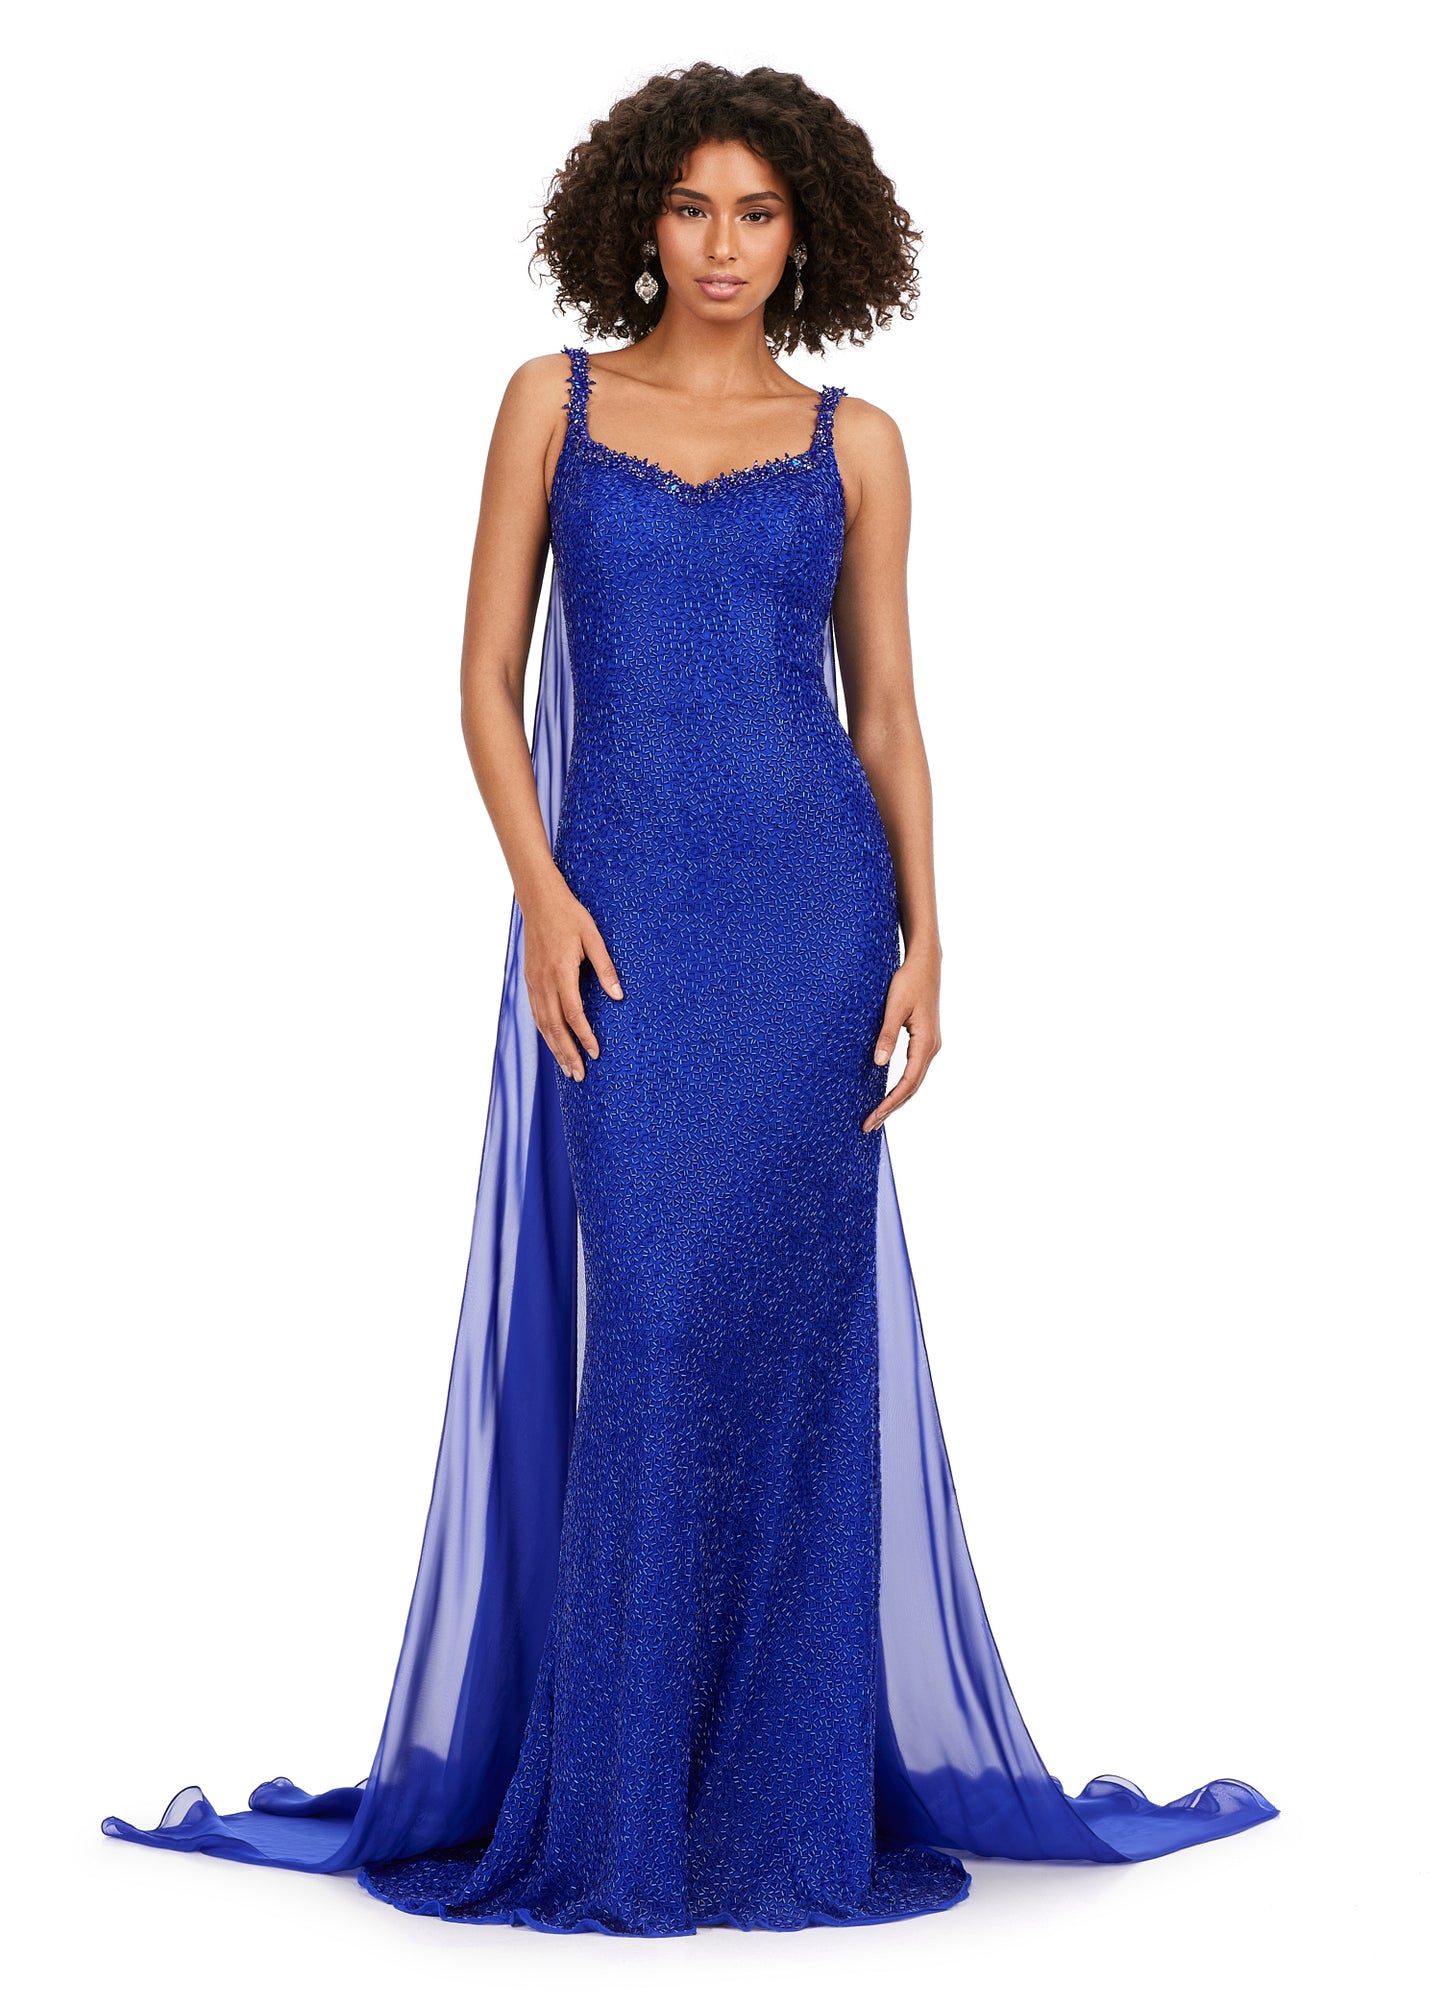 Ashley Lauren 11398 Vermicelli Beaded Gown with Chiffon Cape Crystal Detail Sweetheart Neckline Dress. Talk about stunning! This fully vermicelli beaded gown features crystal adorned straps that continues along the trim of the bustier. The look is complete with a chiffon cape.